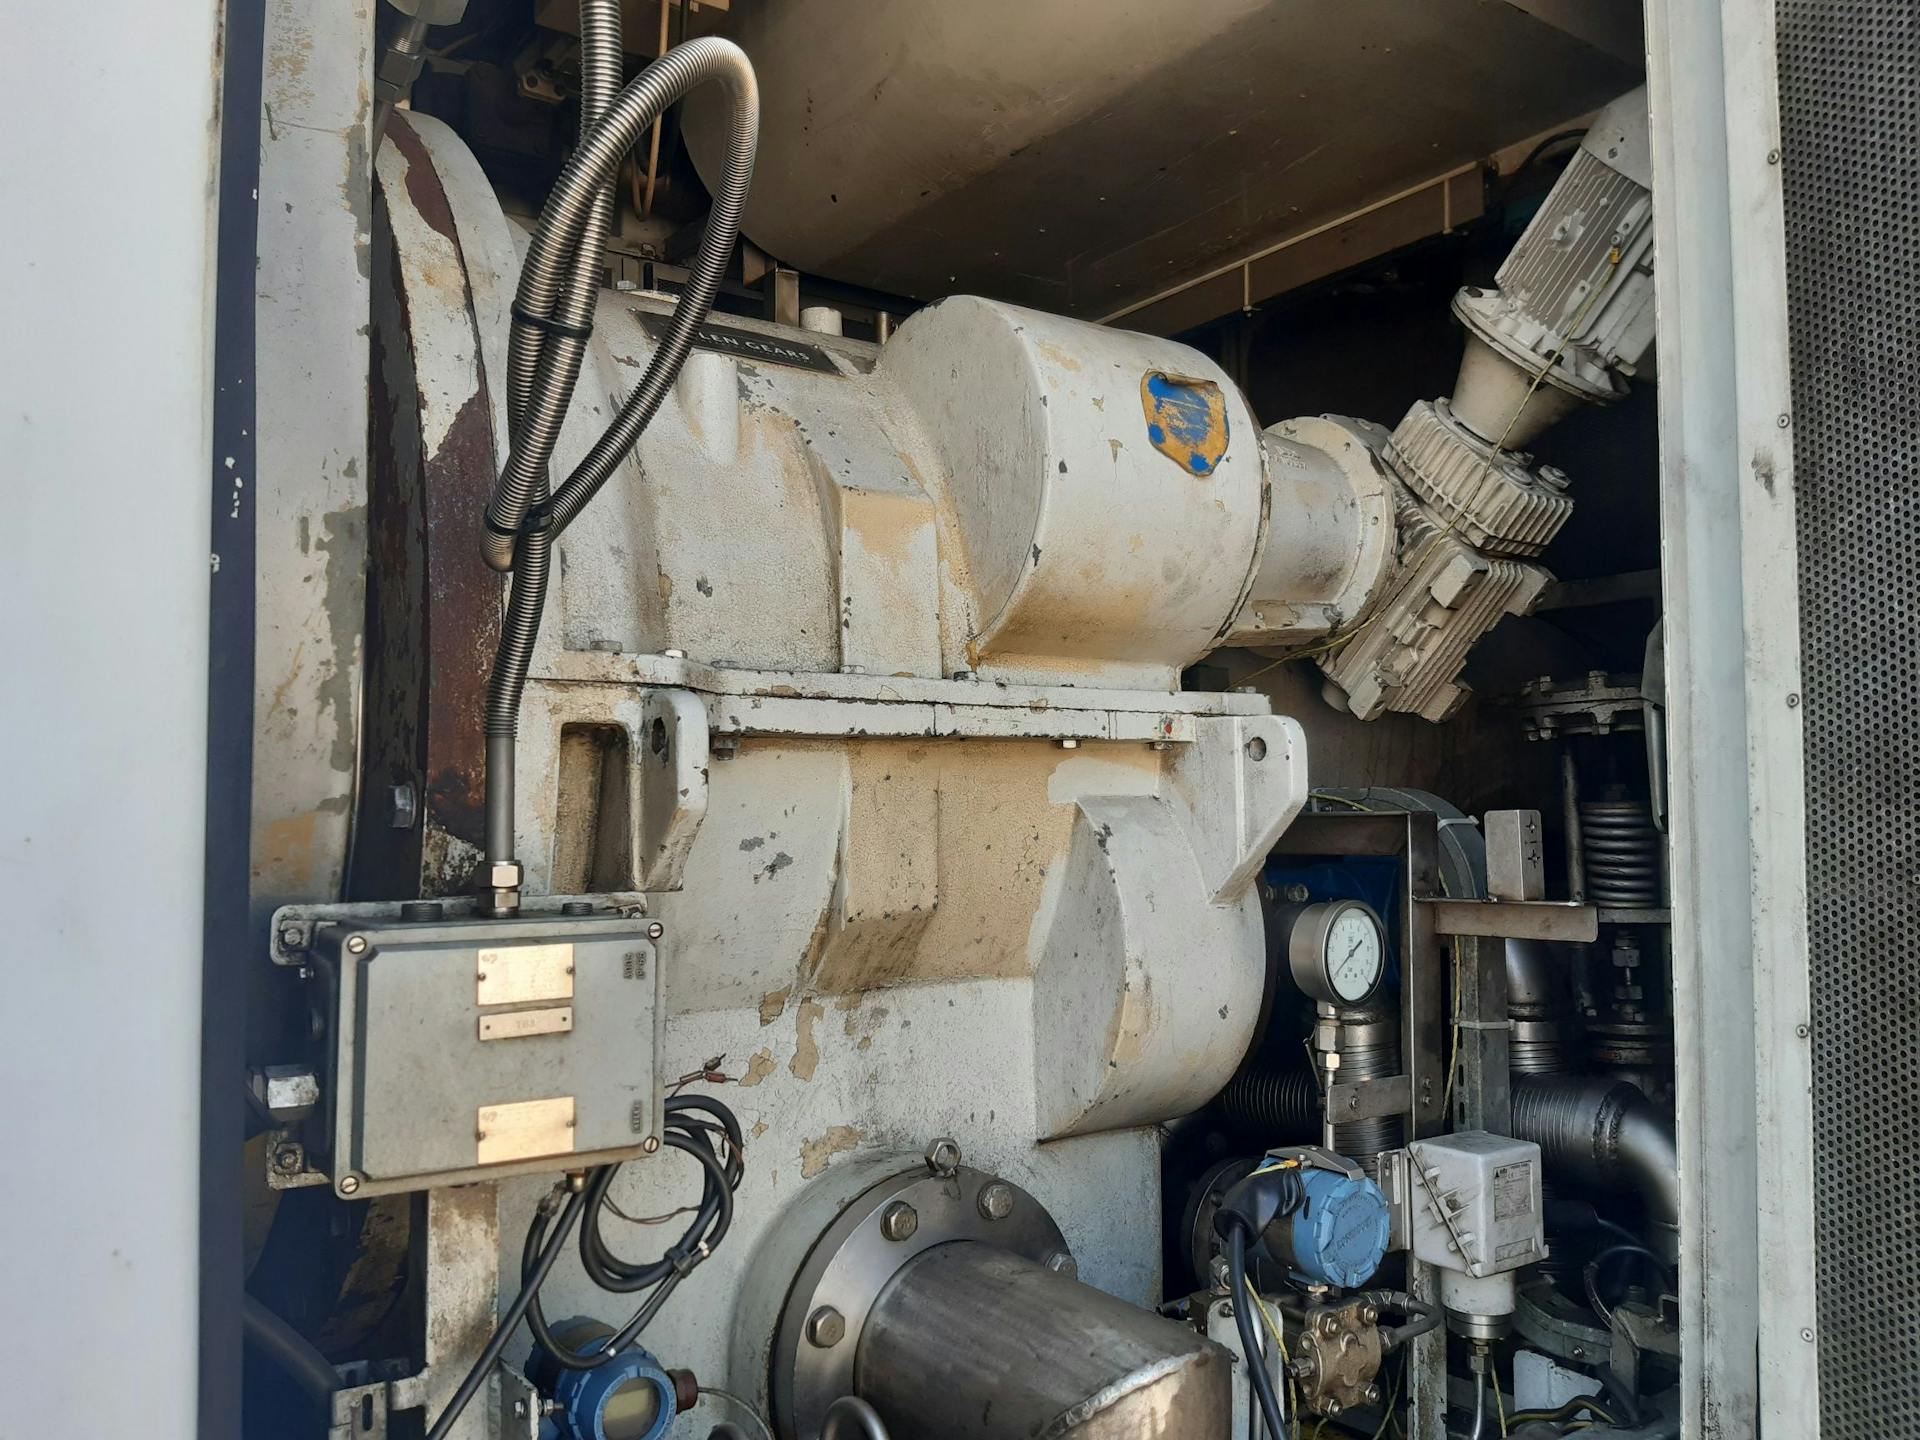 nullPhoto of Turbogas Turbine GE5/1 5MW complete turbogas turbine plant with electric generator and boiler - used gas turbine